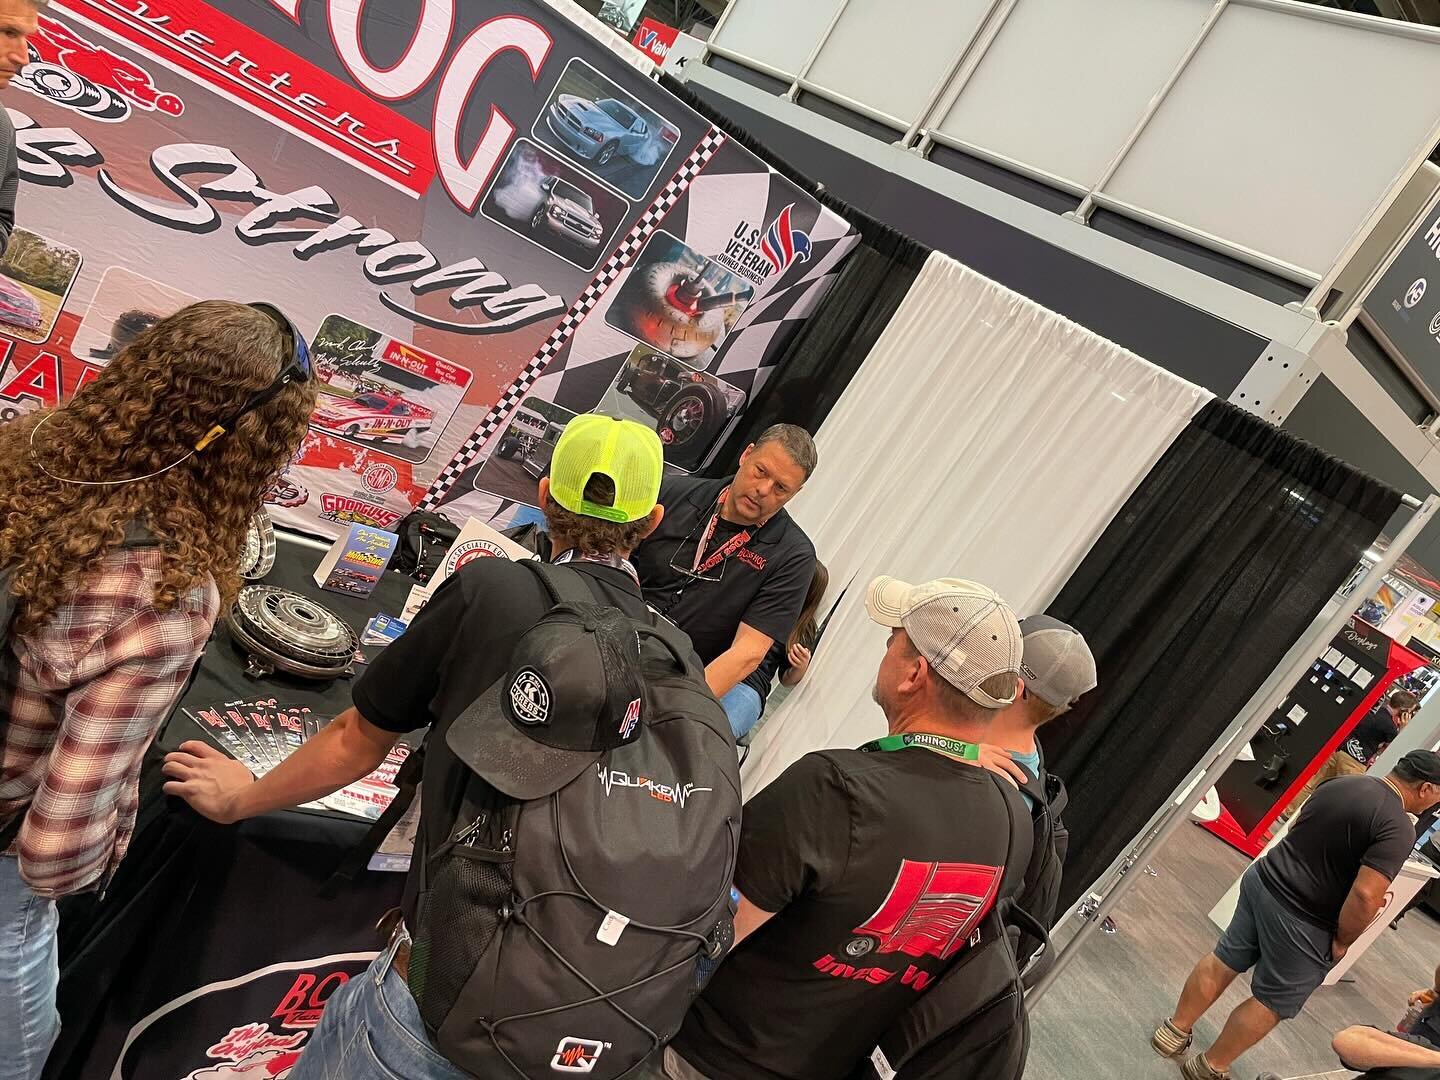 Learning about torque converters from @bosshogacc @quakeled @herculestires @ds18audio @advanceautoparts @valkdesignsolutions @outcastcustom @harpercorp @rockhillschools @tiswheels @thesweetpatina @atcrockhillsc @therealmarkdellinger @rhinousa @sherwi